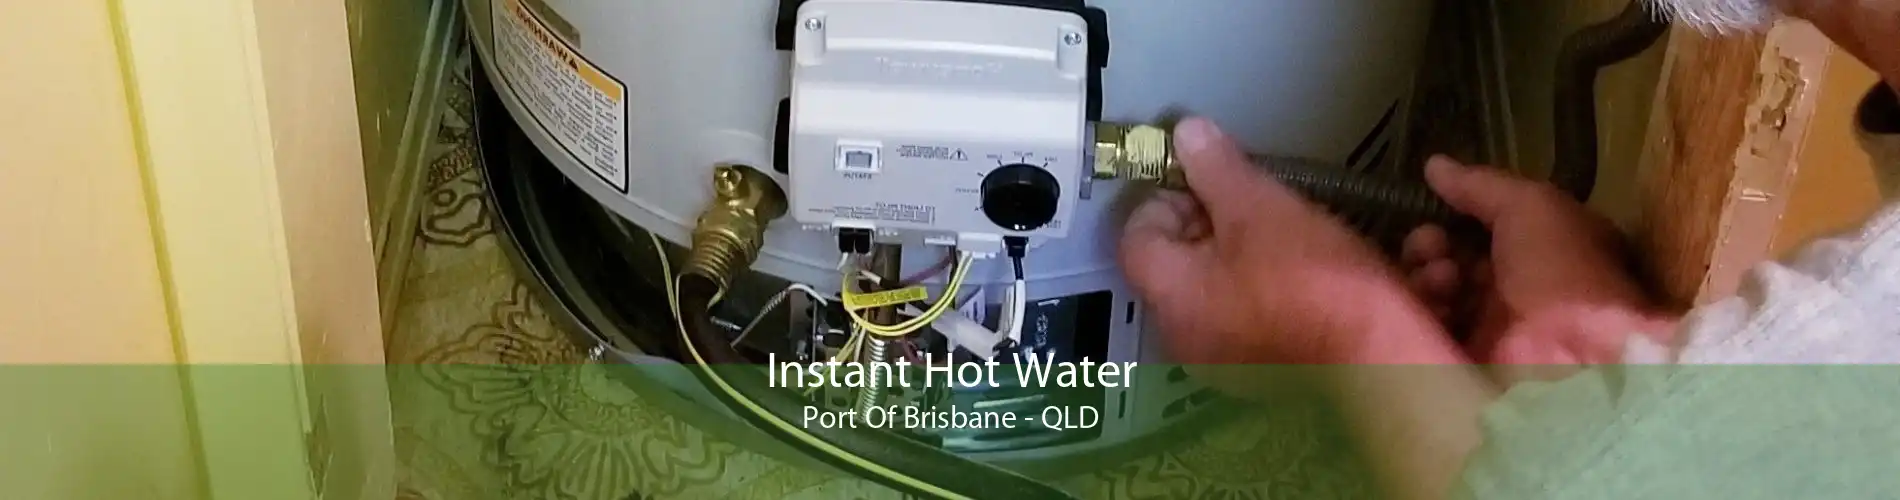 Instant Hot Water Port Of Brisbane - QLD